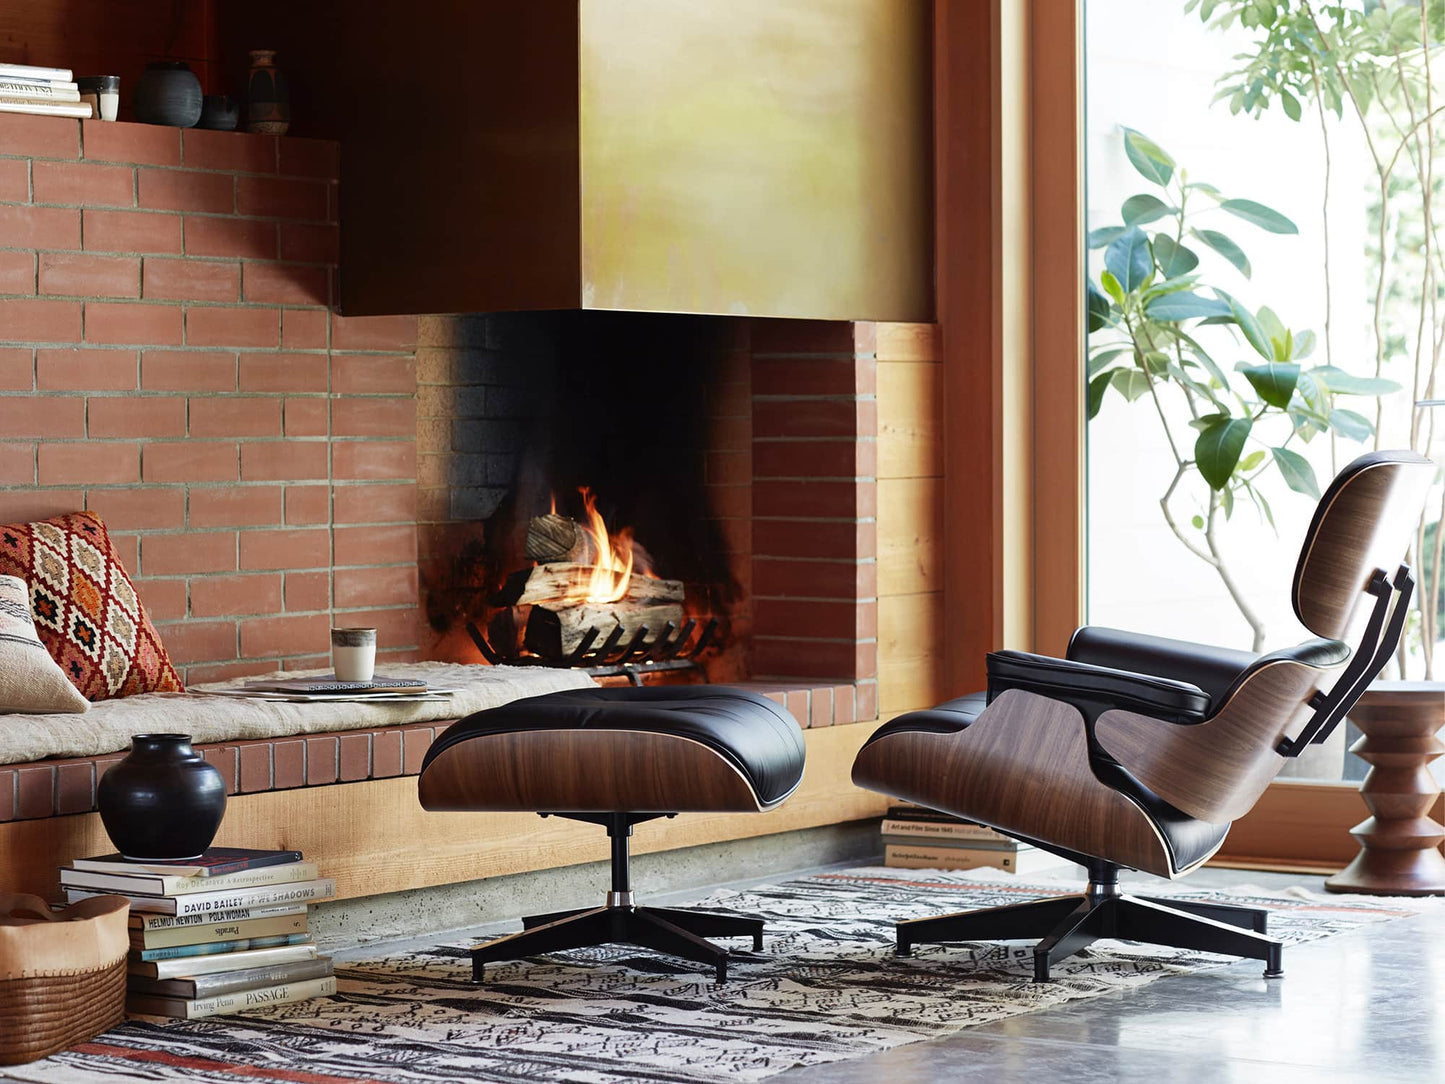 Eames® lounge chair and ottoman